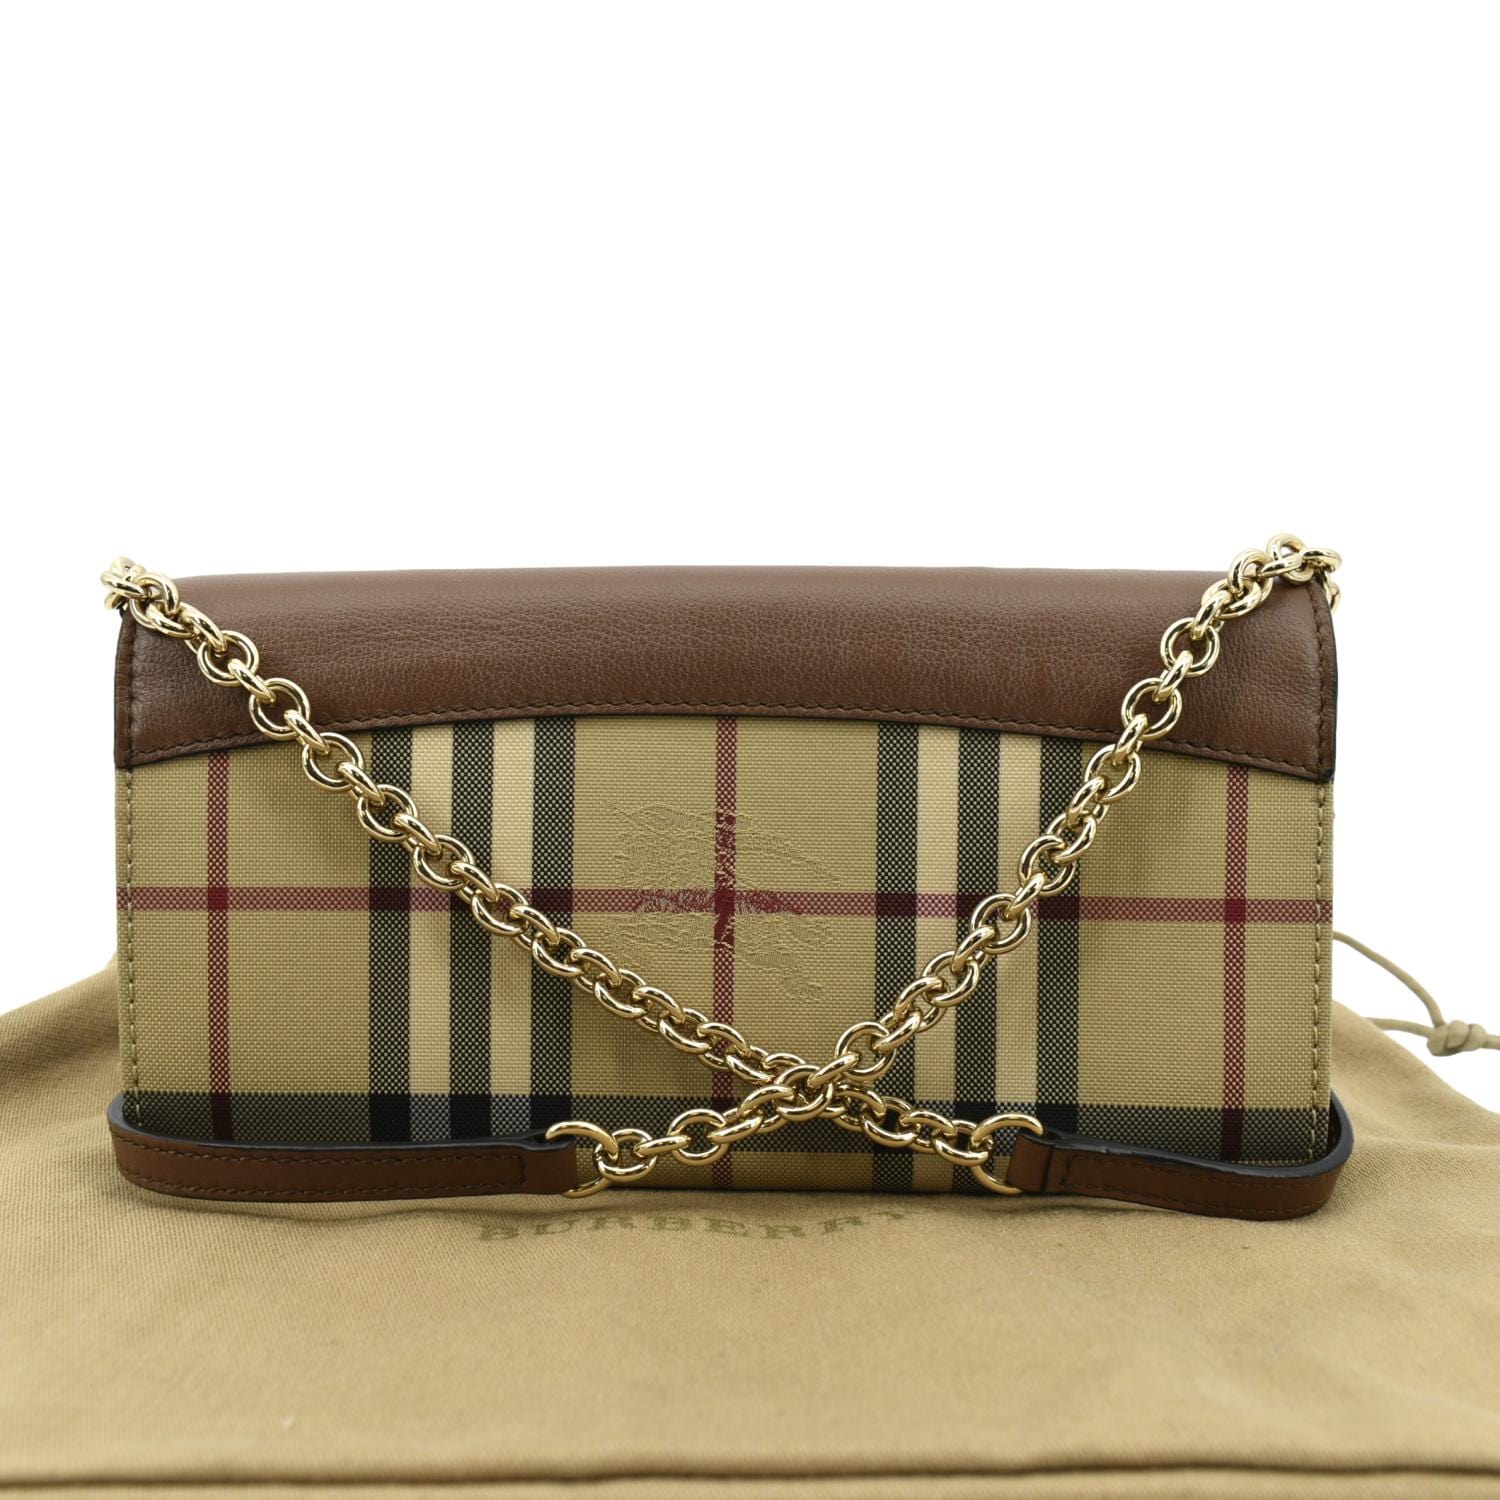 Burberry Card holder with chain, Women's Accessories